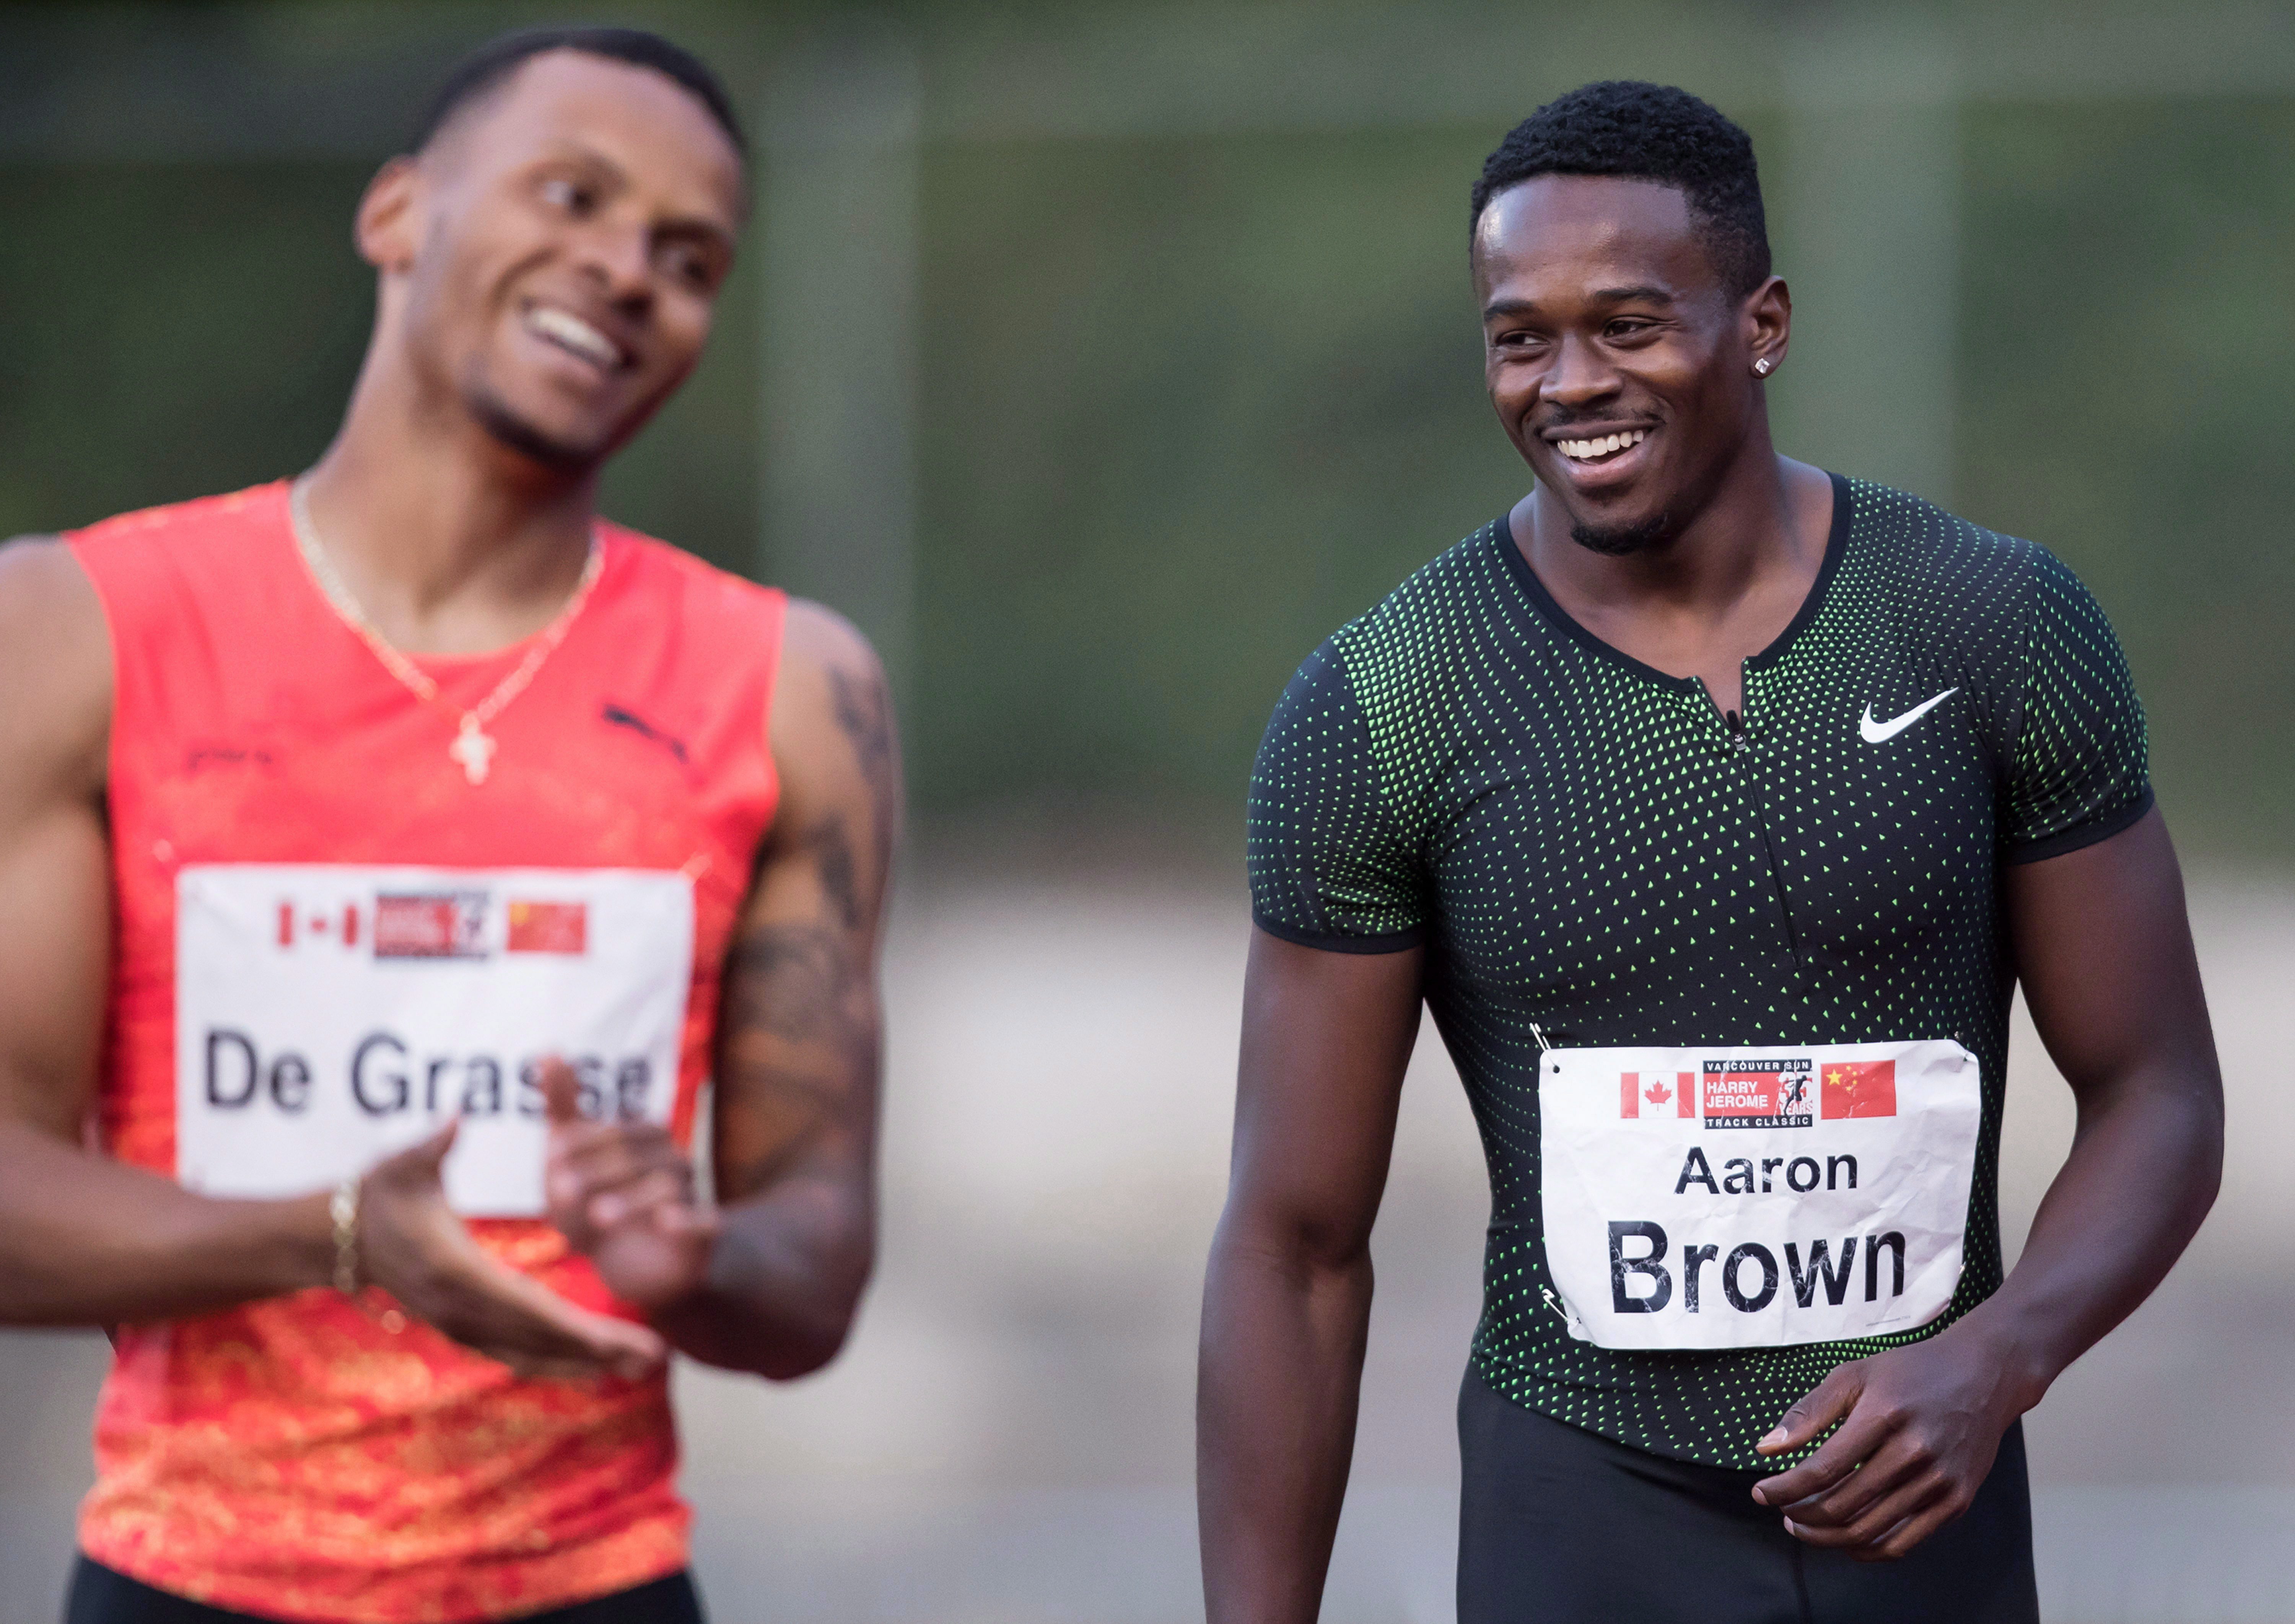 Aaron Brown and Andre De Grasse laugh together